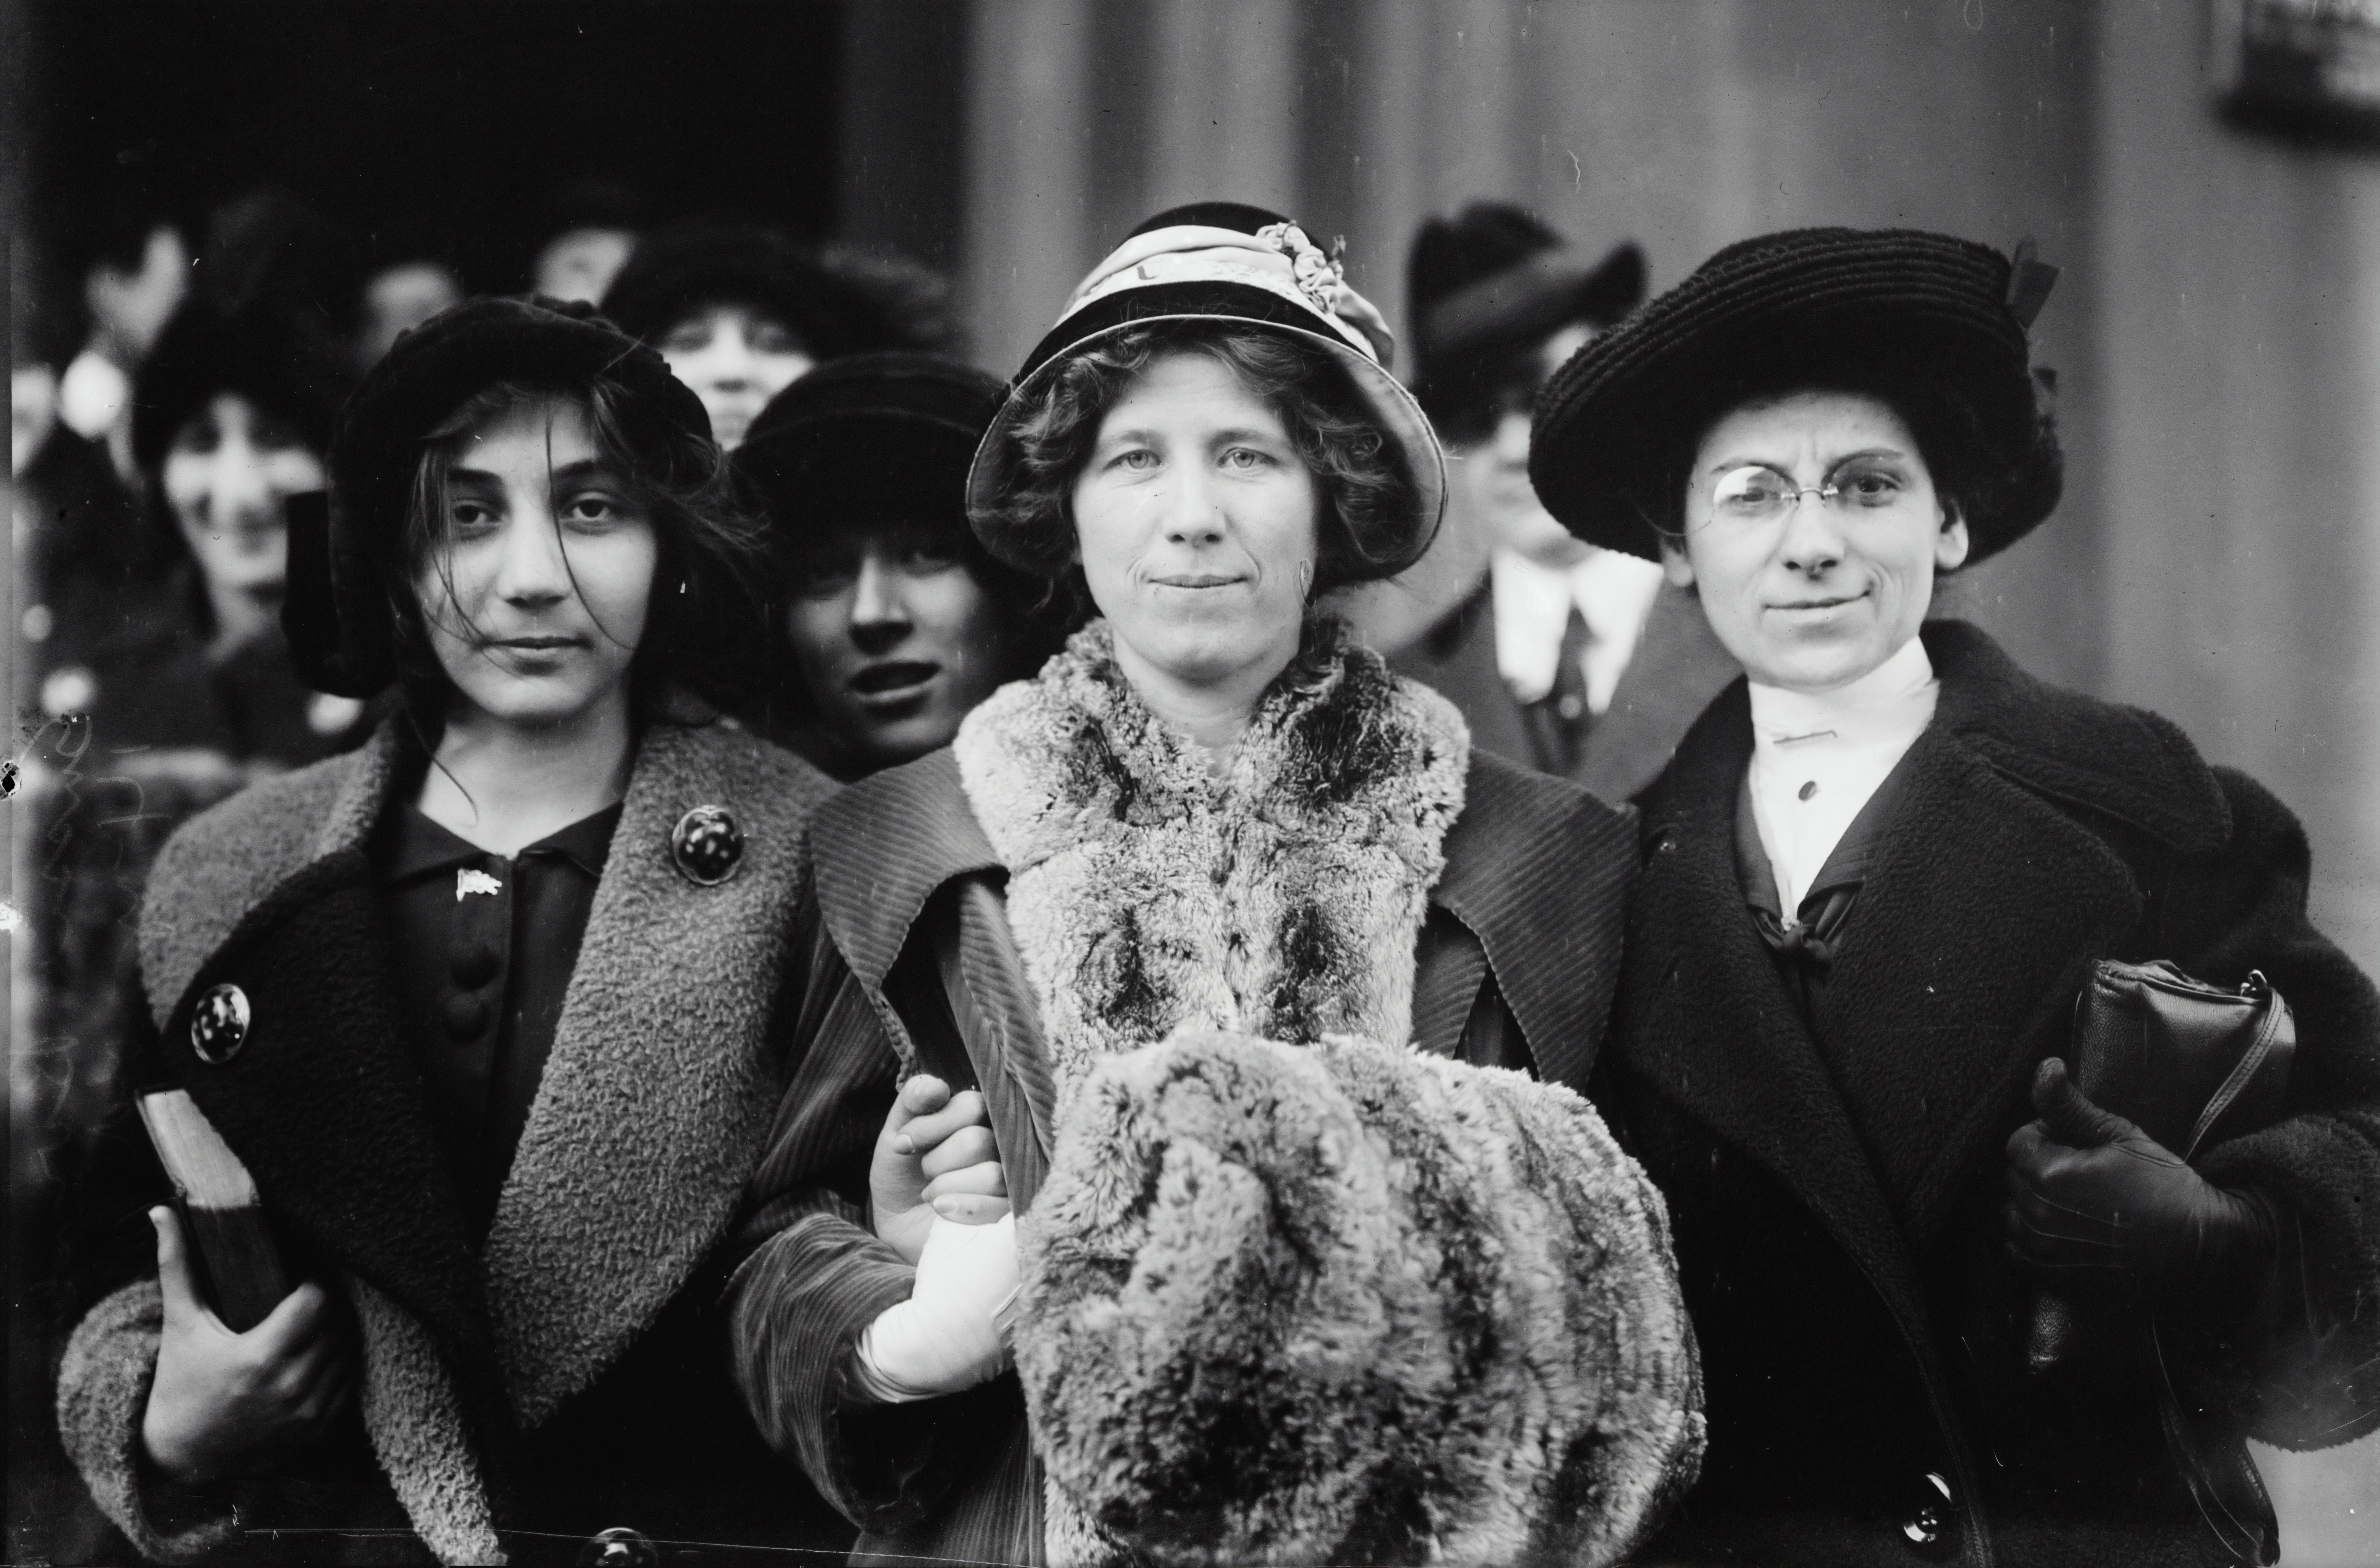 Historic photo of three women (from the Library of Congress)